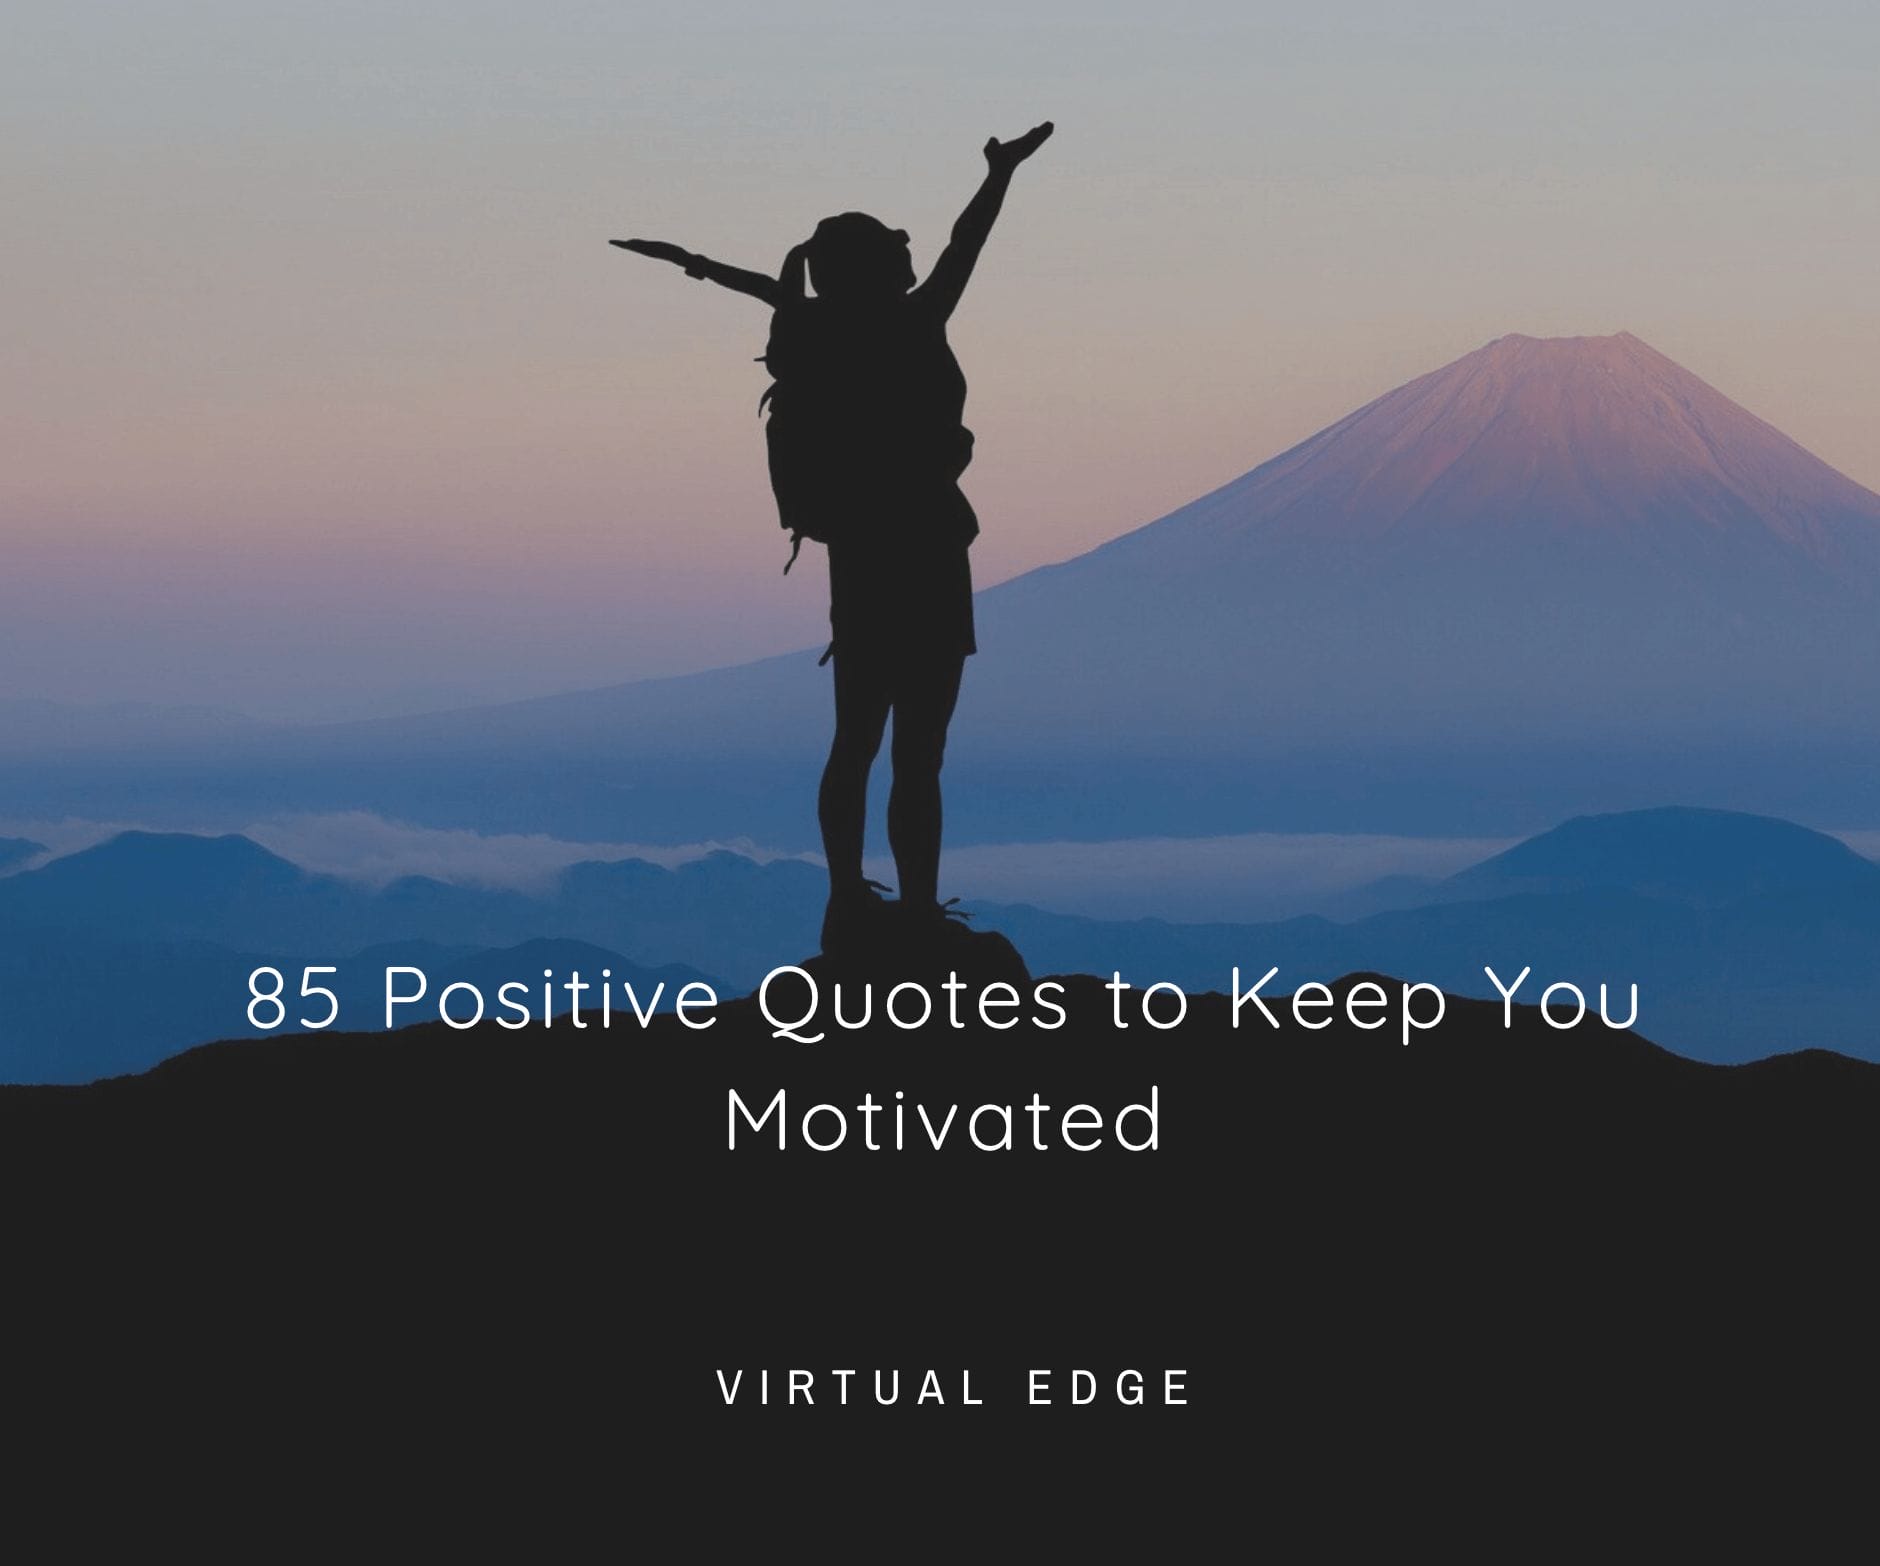 85 Positive Quotes to Keep You Motivated